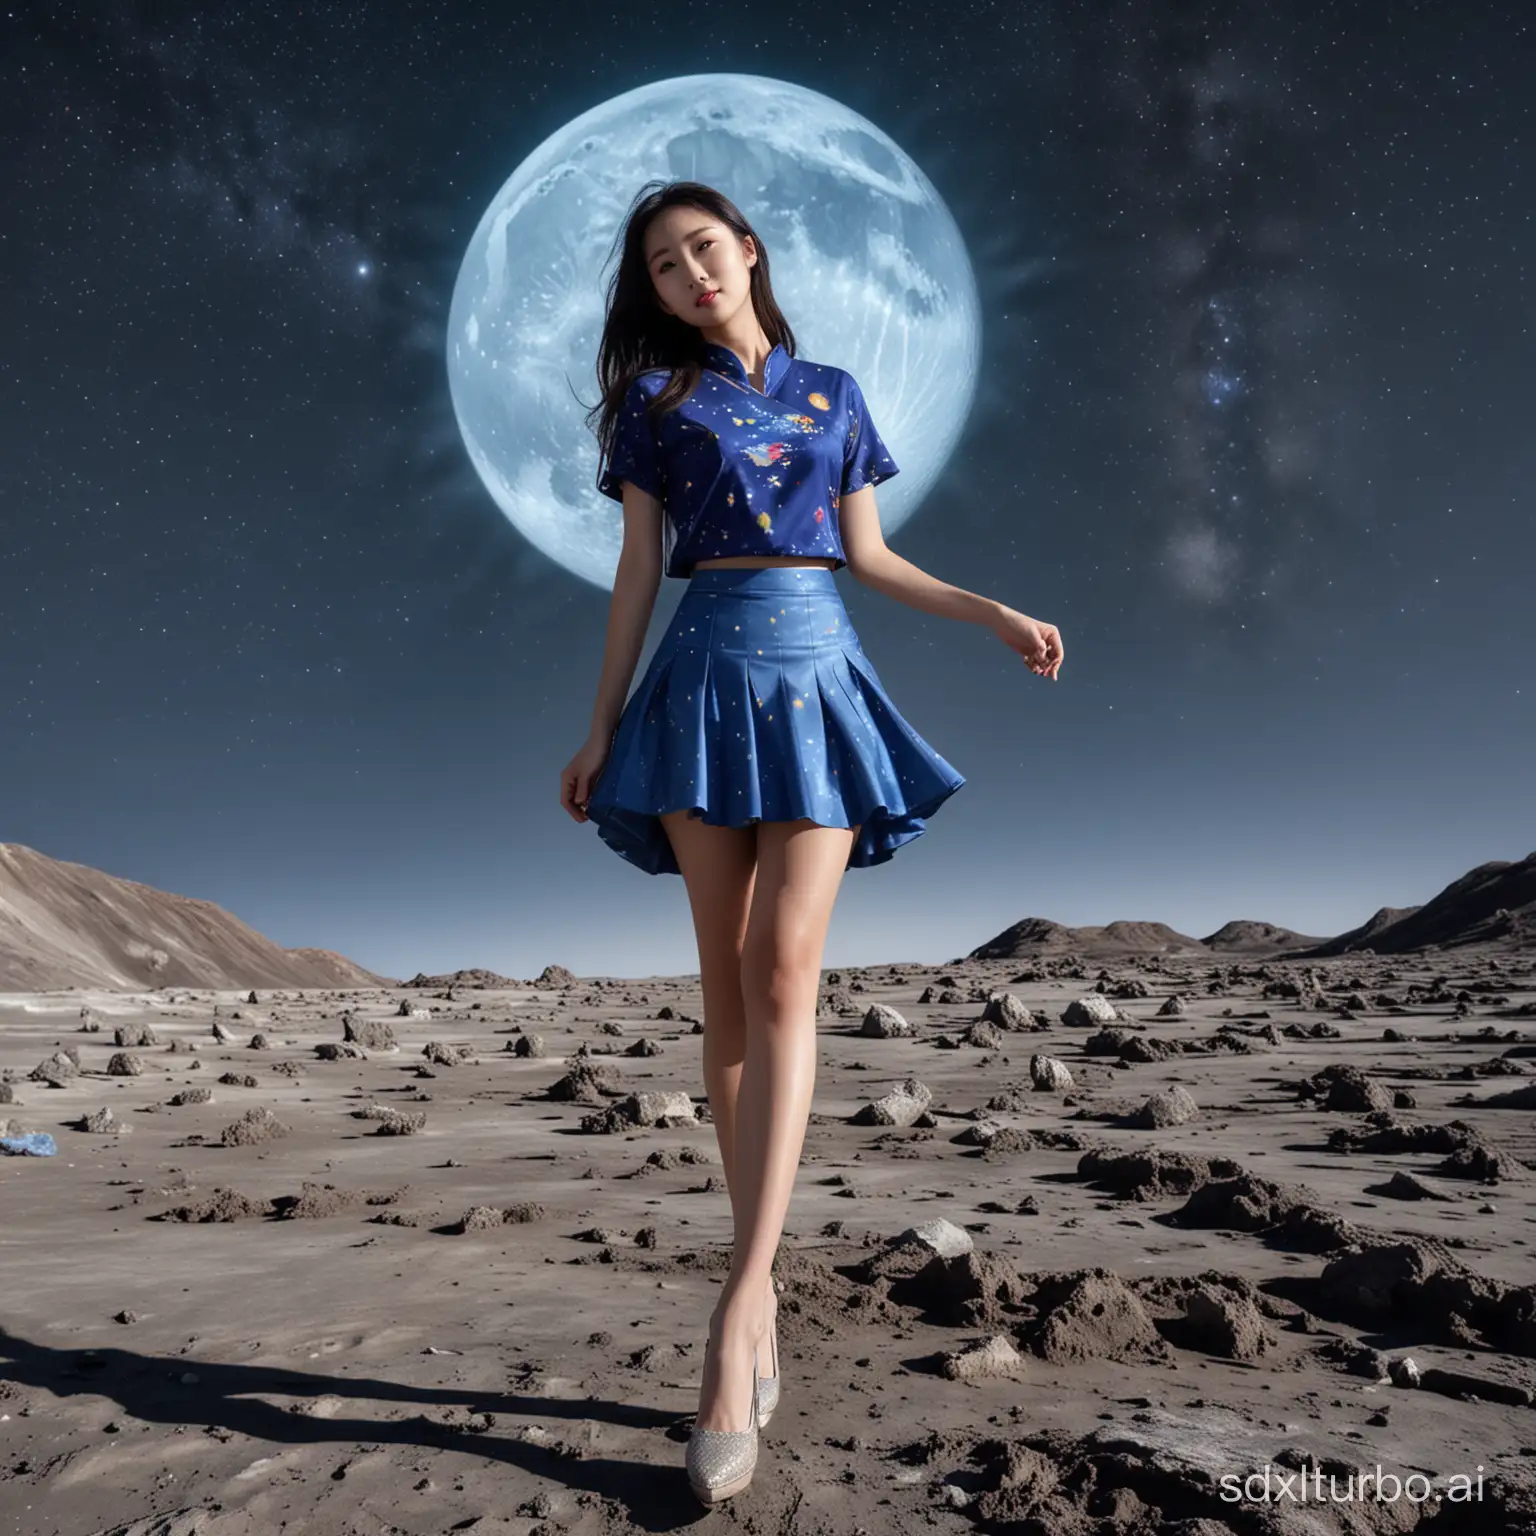 Stylish-Chinese-Woman-on-the-Moon-with-Earth-in-Background